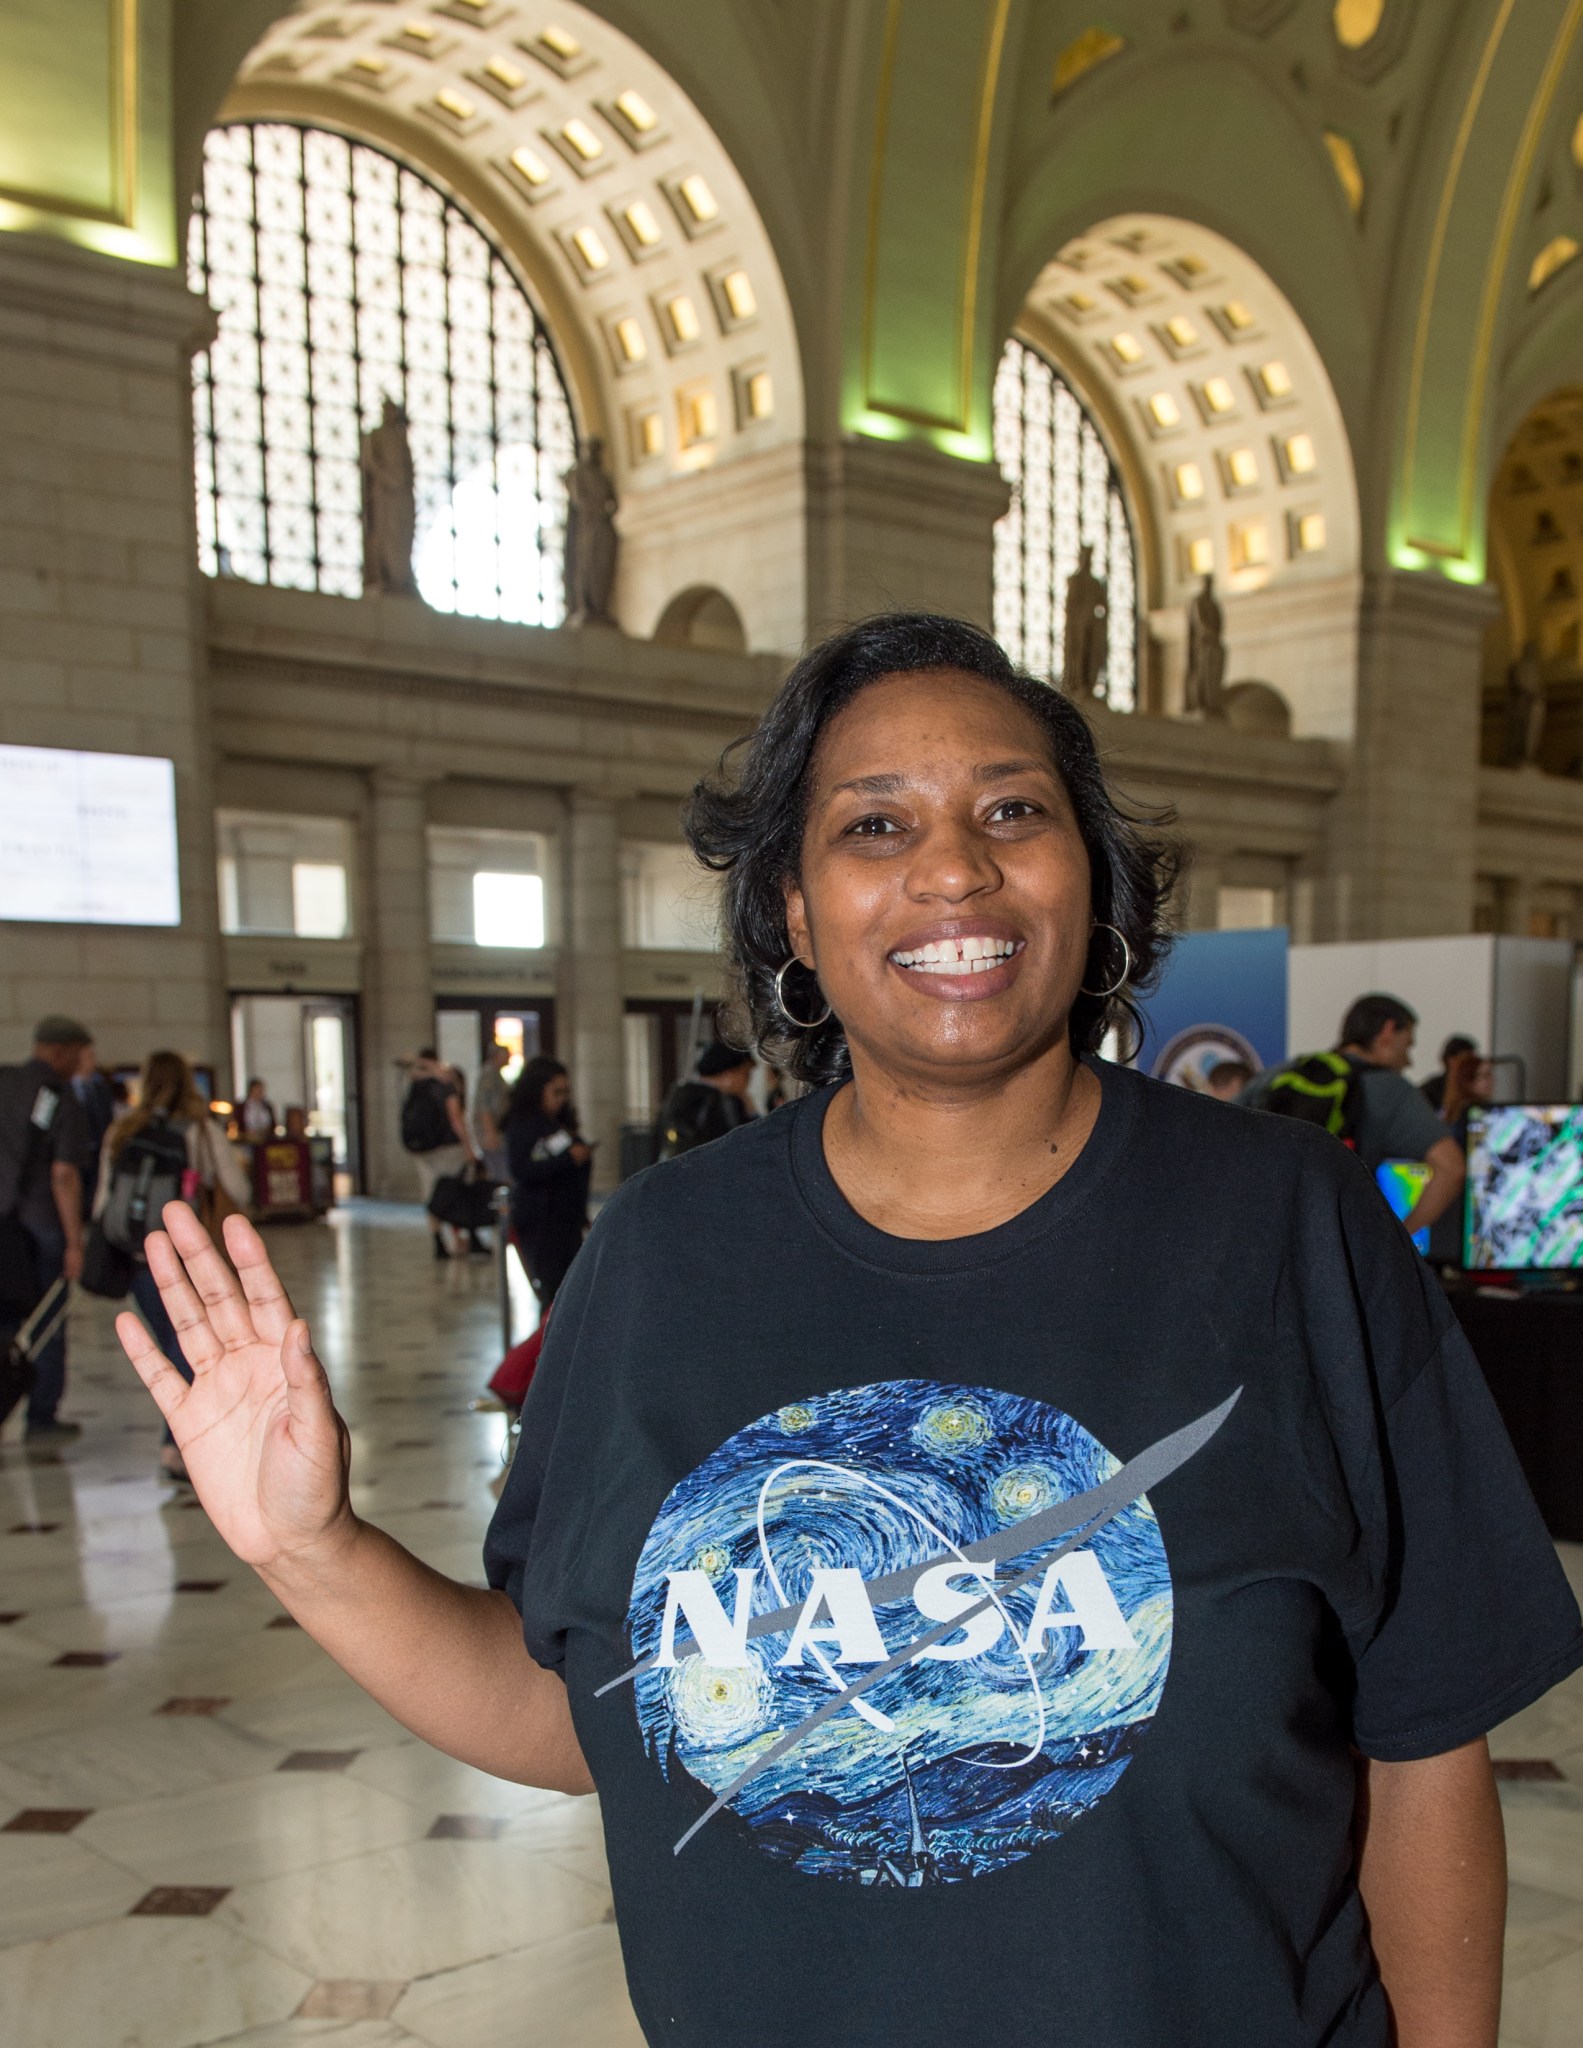 Trena Ferrell smiles and waves at the camera in a large train station atrium with high, arched ceilings. She wears a navy tee with a colorful NASA logo and hoop earrings. Many people are visible in the background.